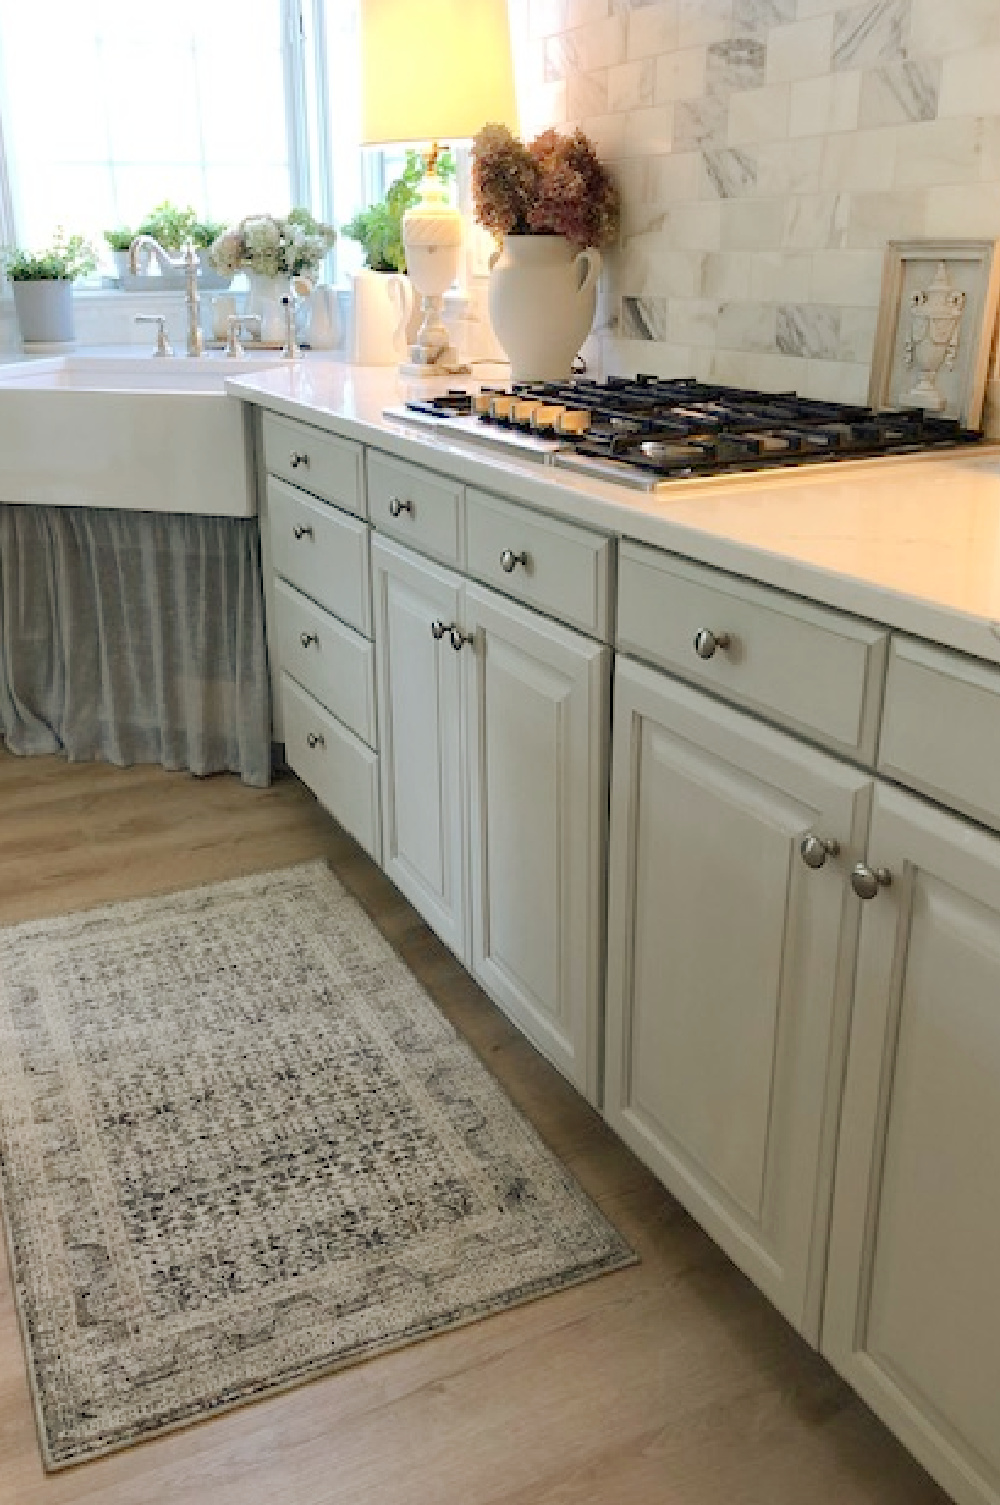 Modern French kitchen with Amber Lewis Zuma rug in ocean/multi near cooktop - Hello Lovely Studio.